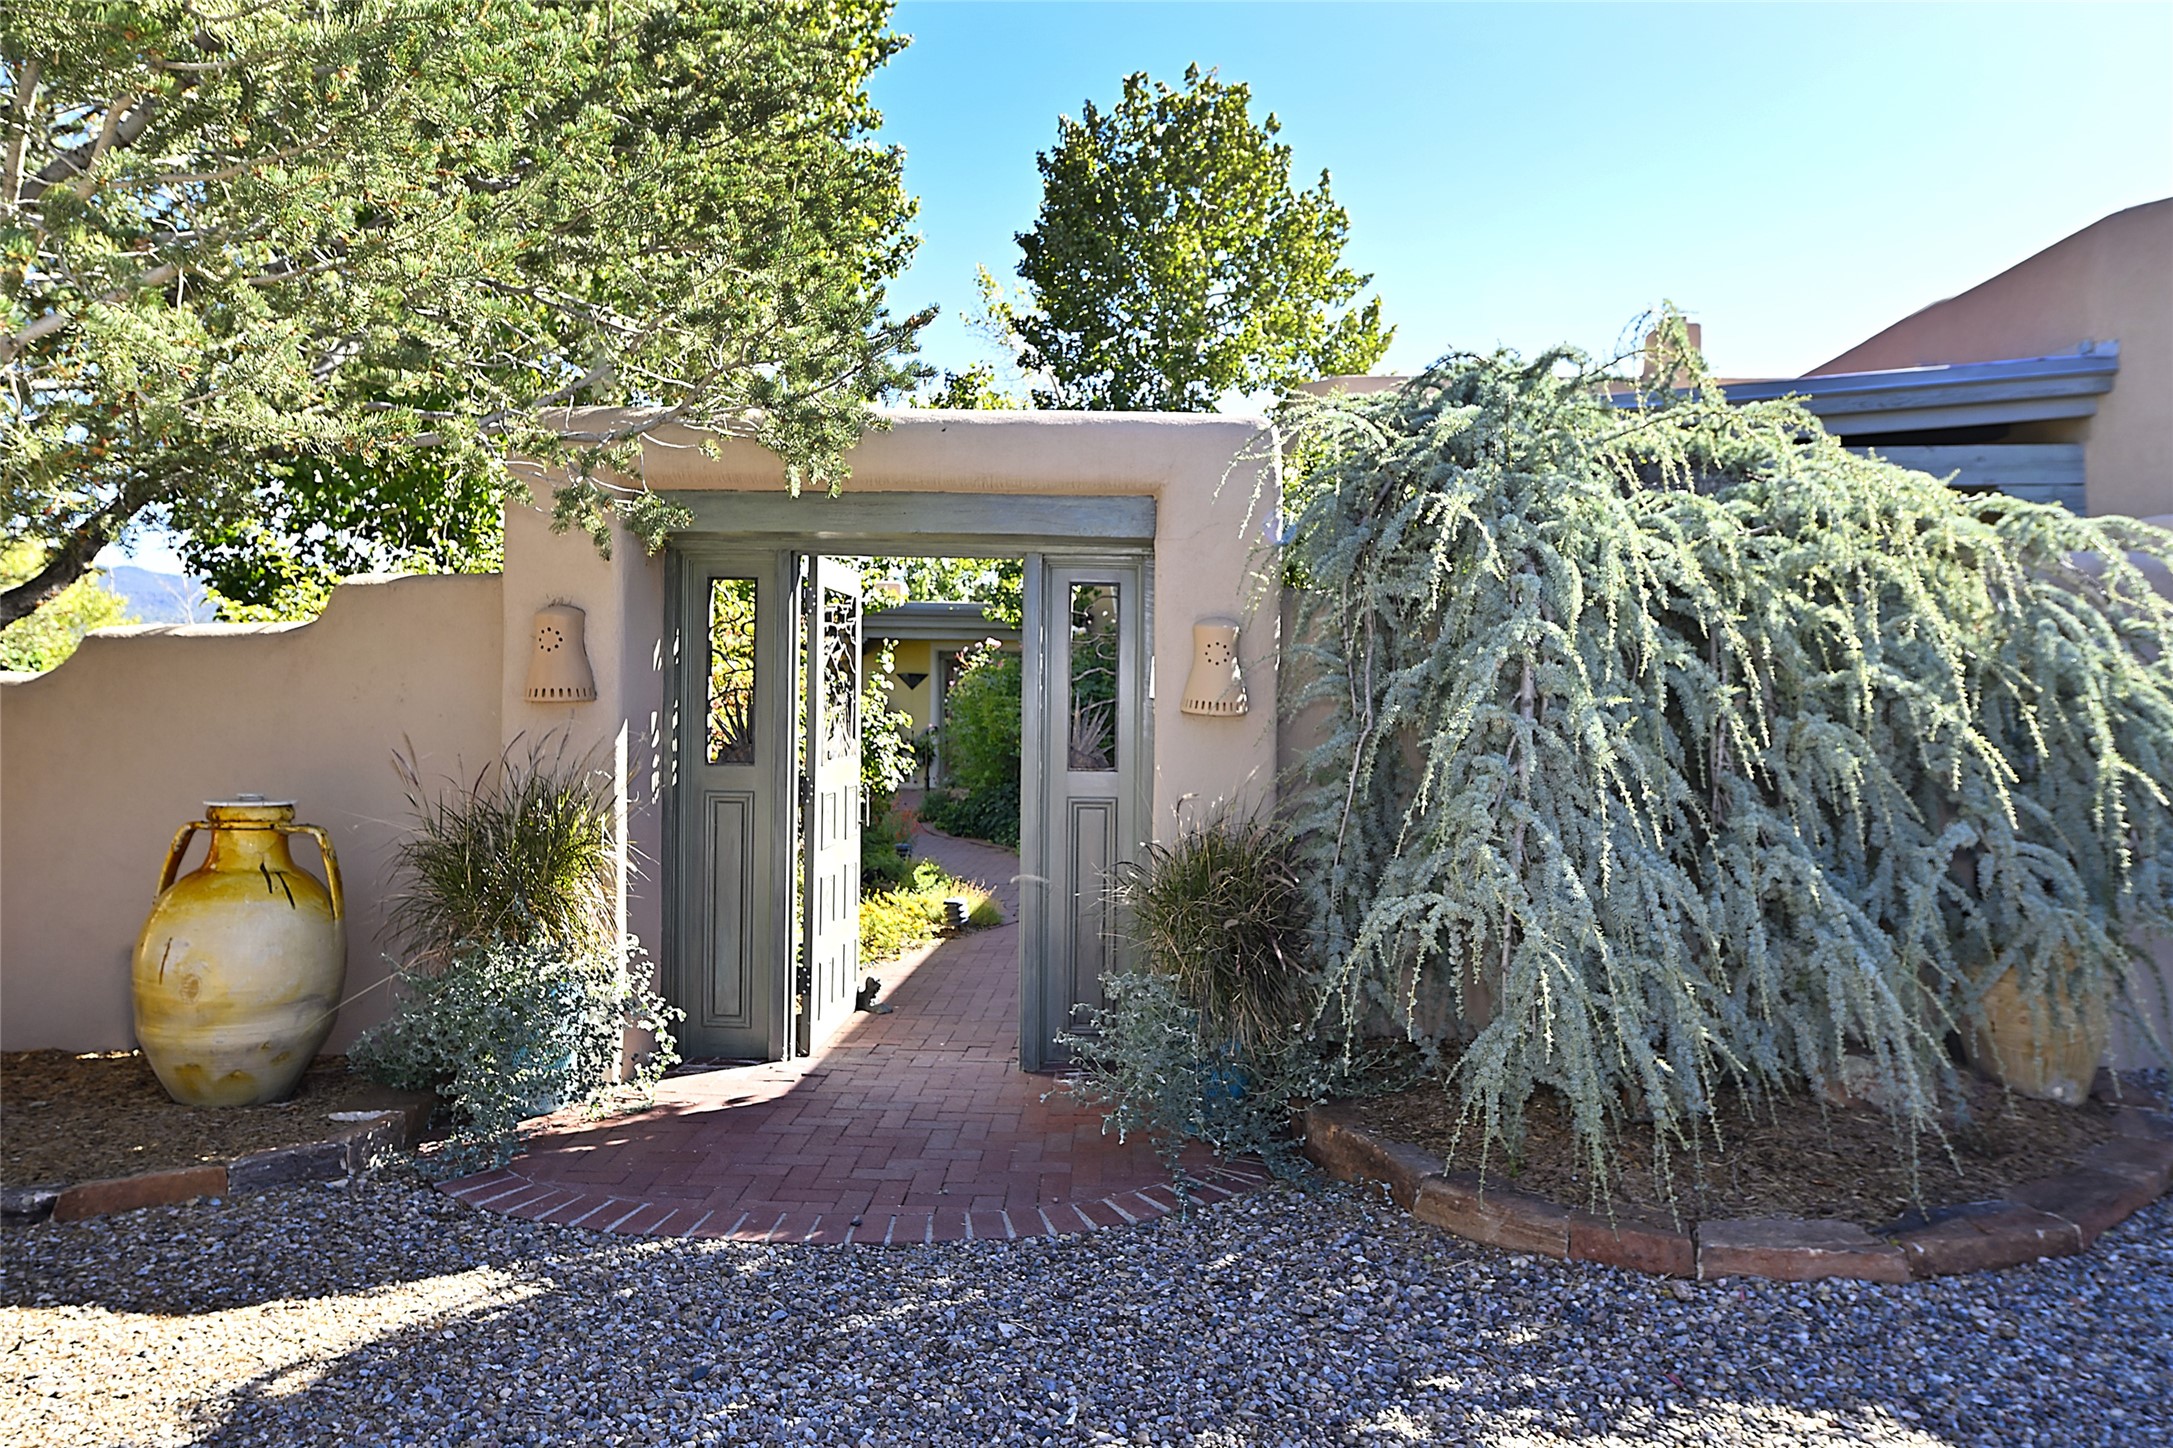 On a cul-de-sac in a secluded, quiet community just north of downtown Santa Fe and the Plaza